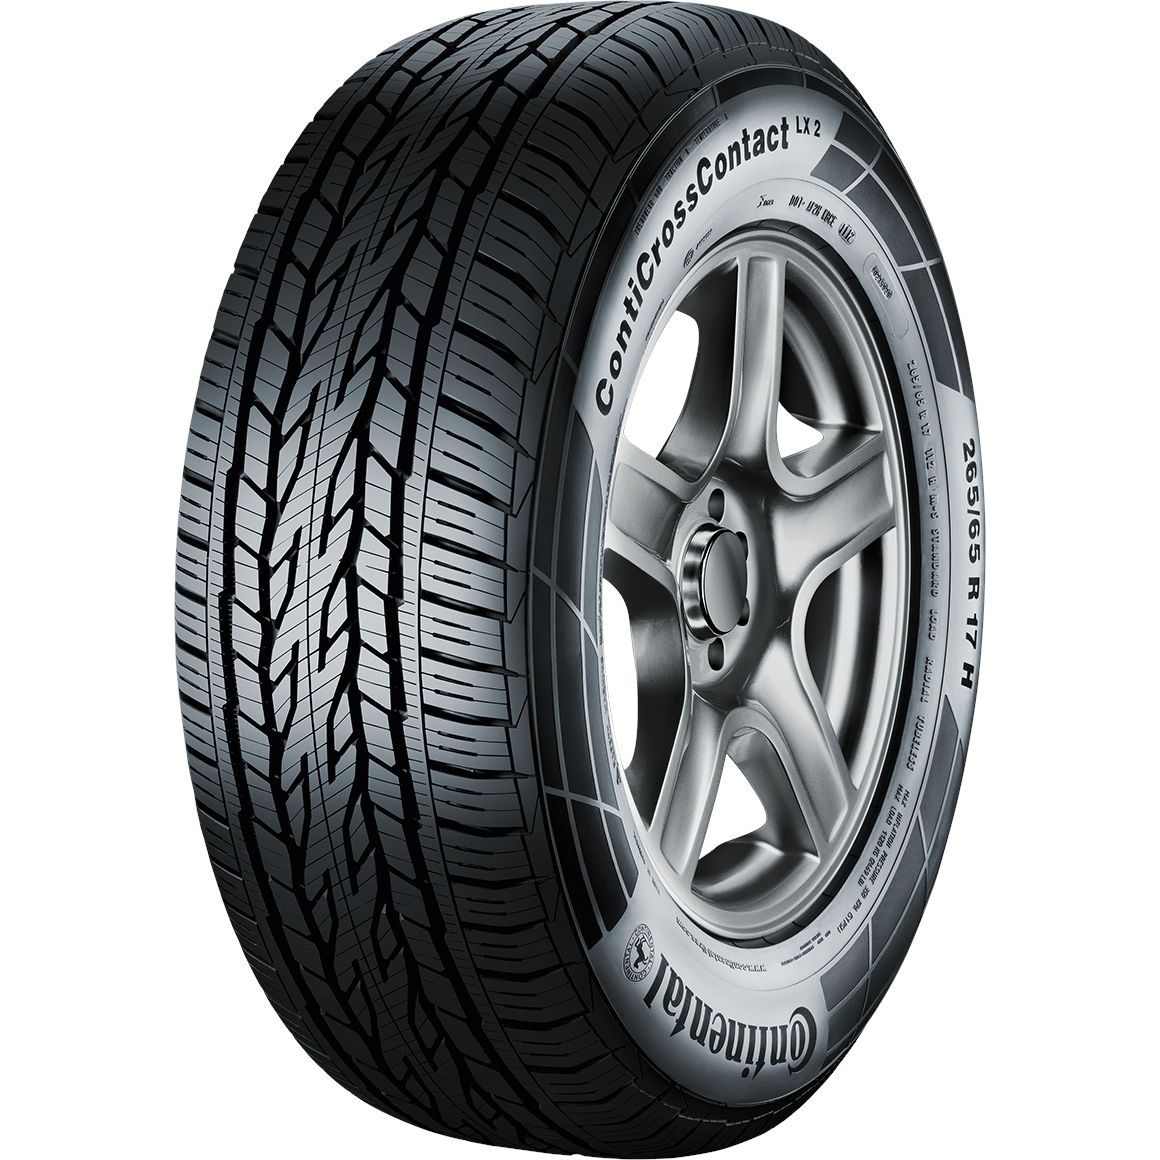 Continental 235/55R18 100V ContiCrossContact™ LX 2 DOT21